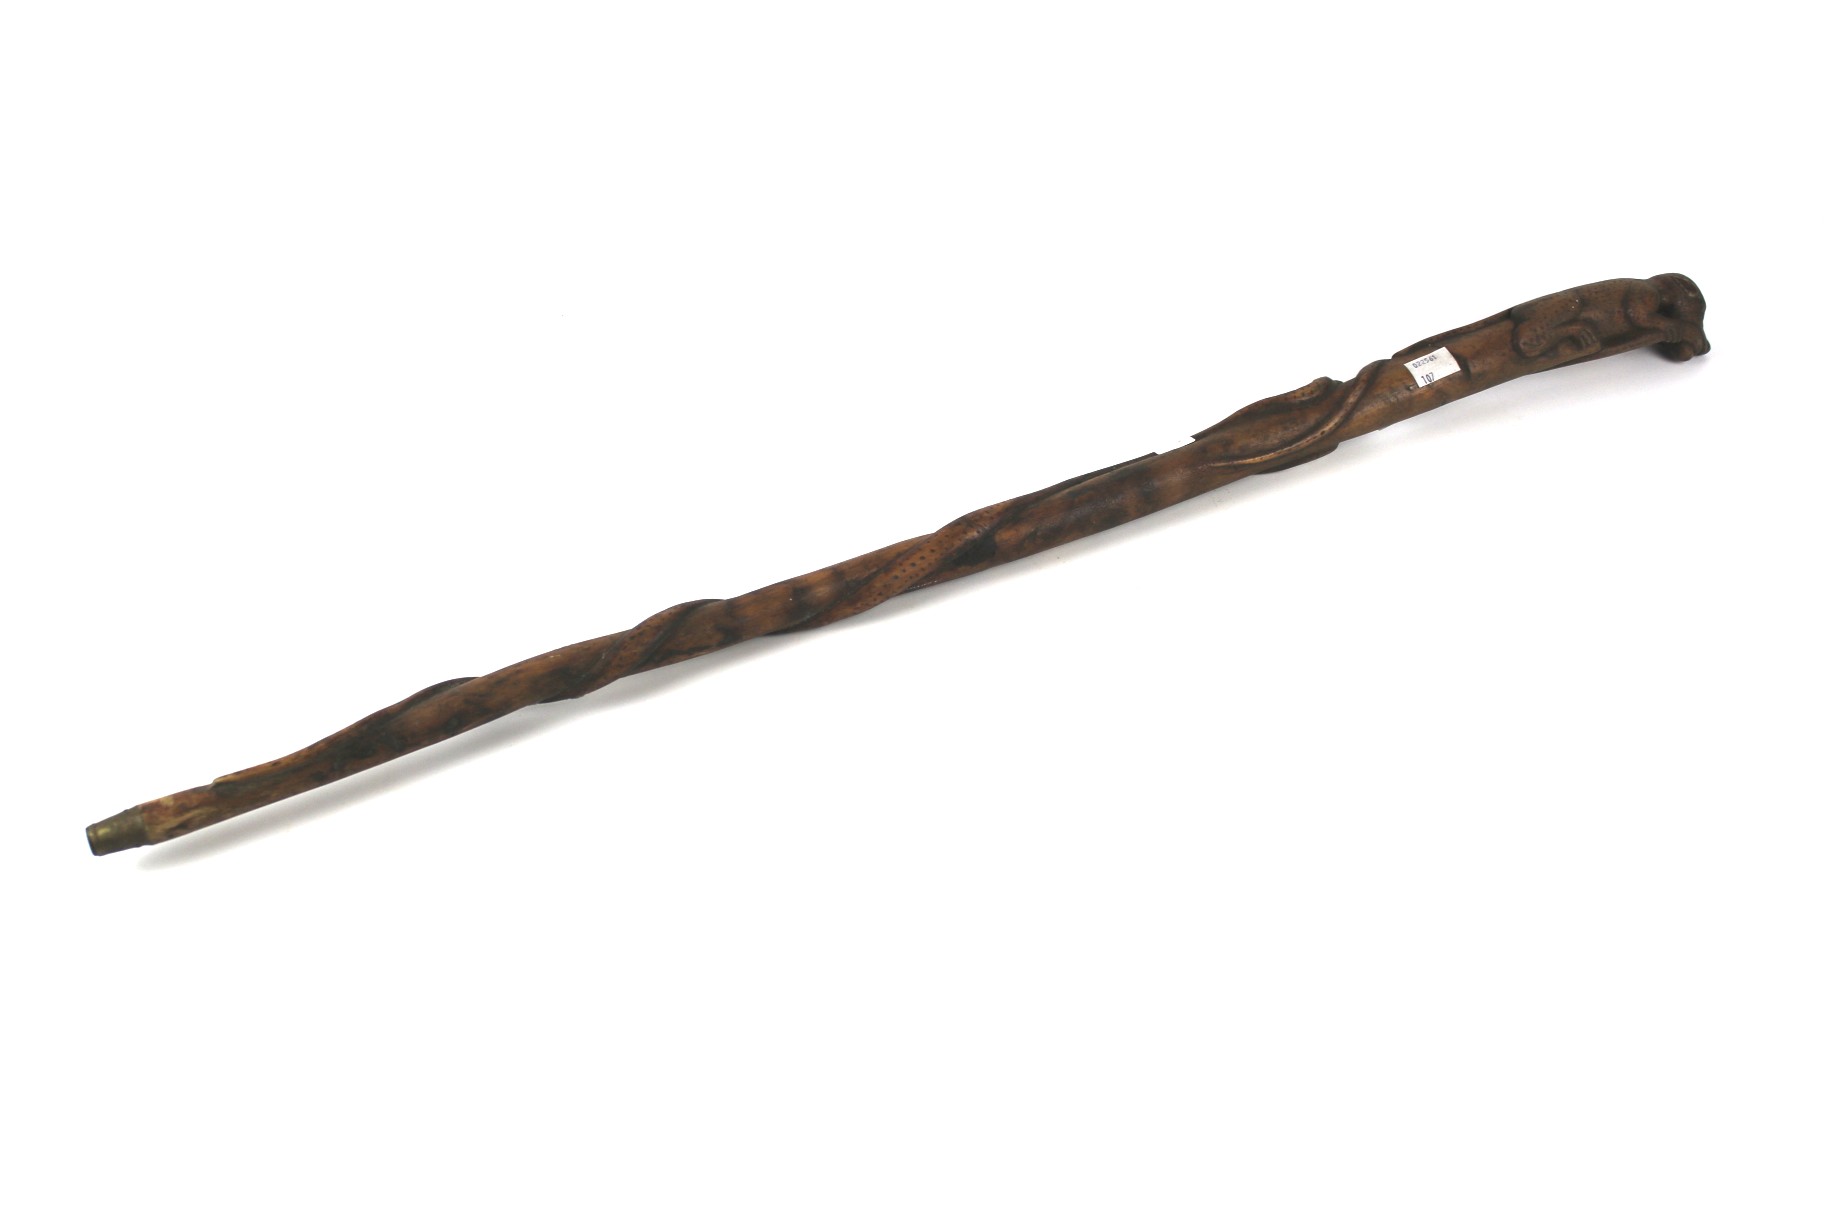 A 20th century carved wooden walking stick.